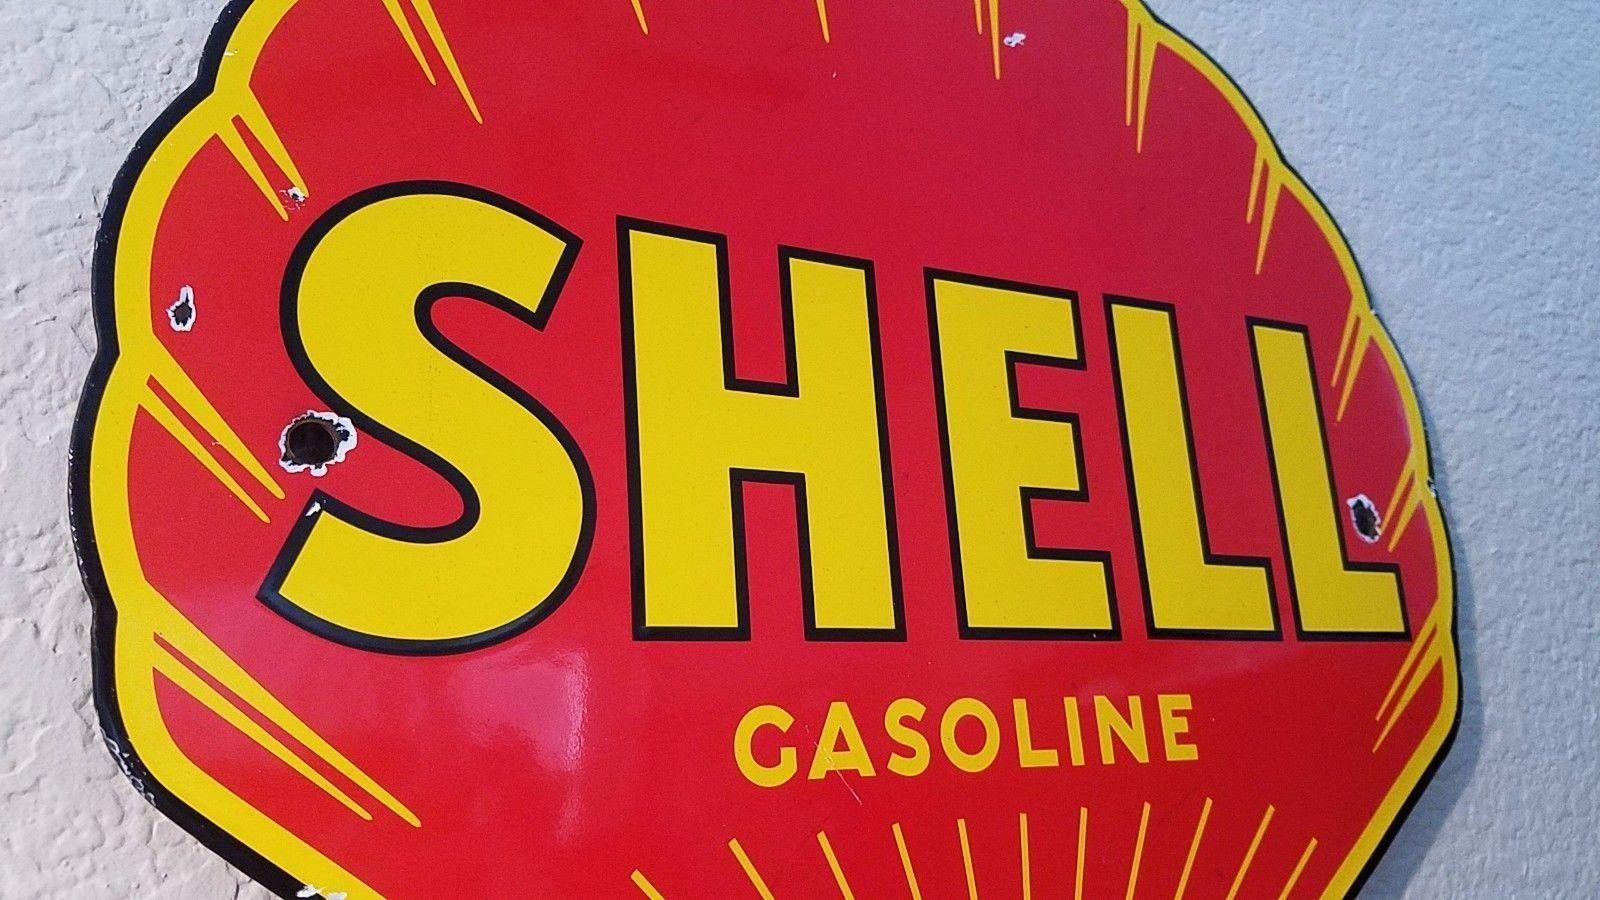 Yellow and Red Clam Logo - VINTAGE RED CLAM SHELL GASOLINE PORCELAIN GAS MOTOR OIL PUMP PLATE ...